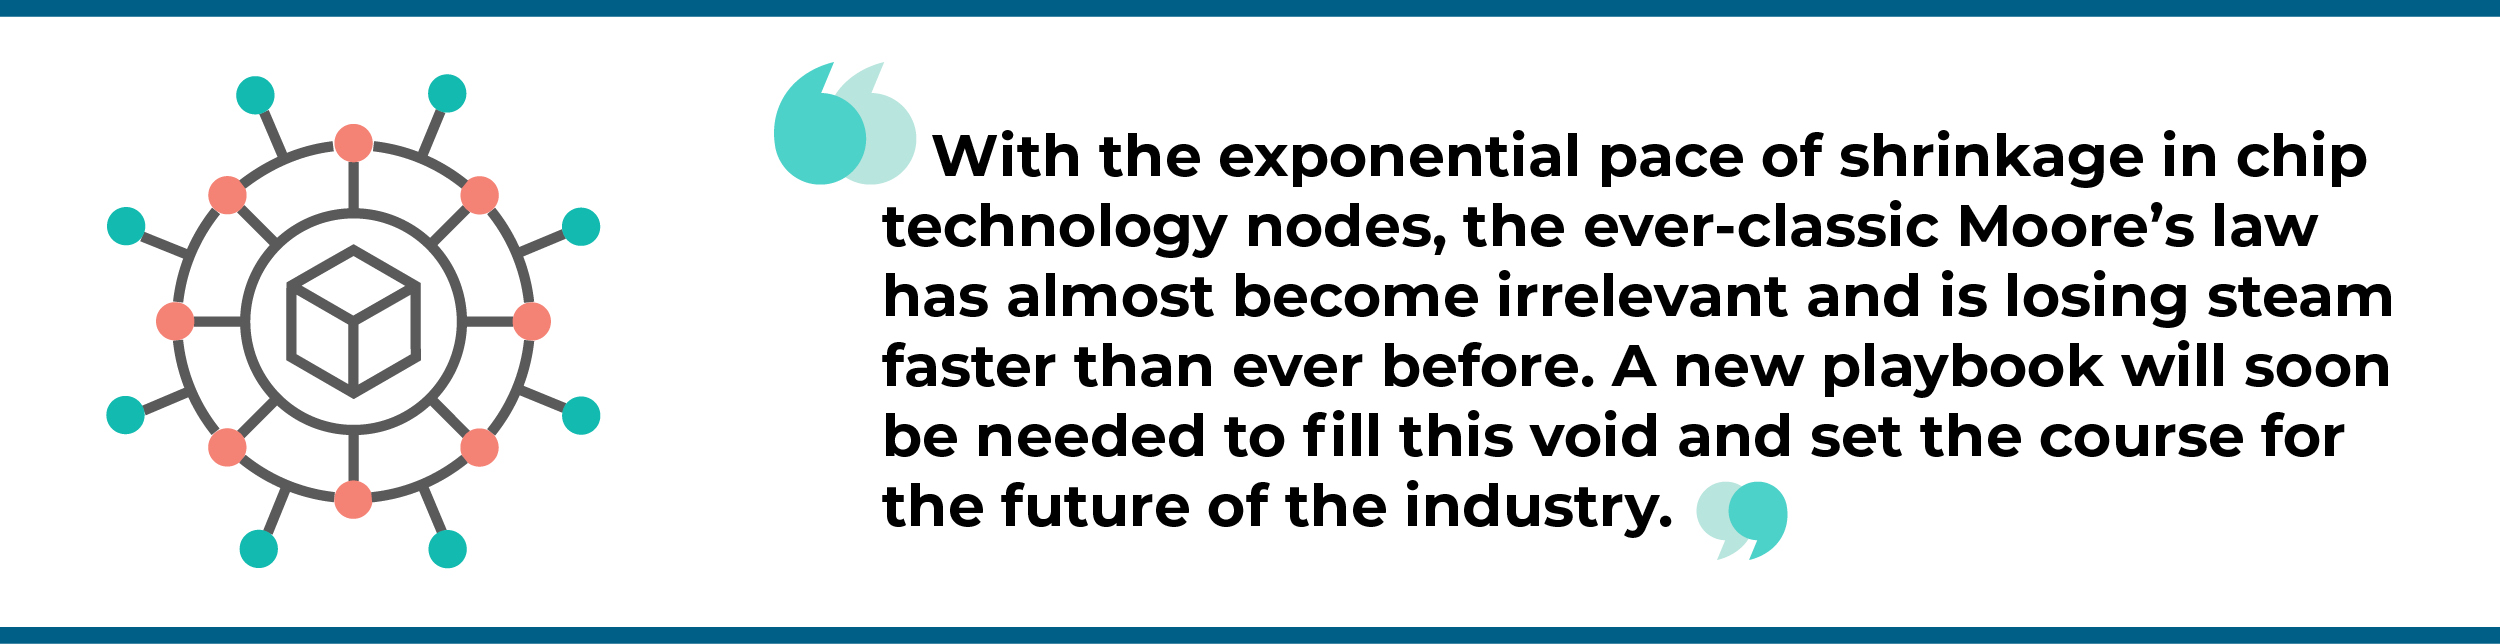 ai in semiconductor industry quote2